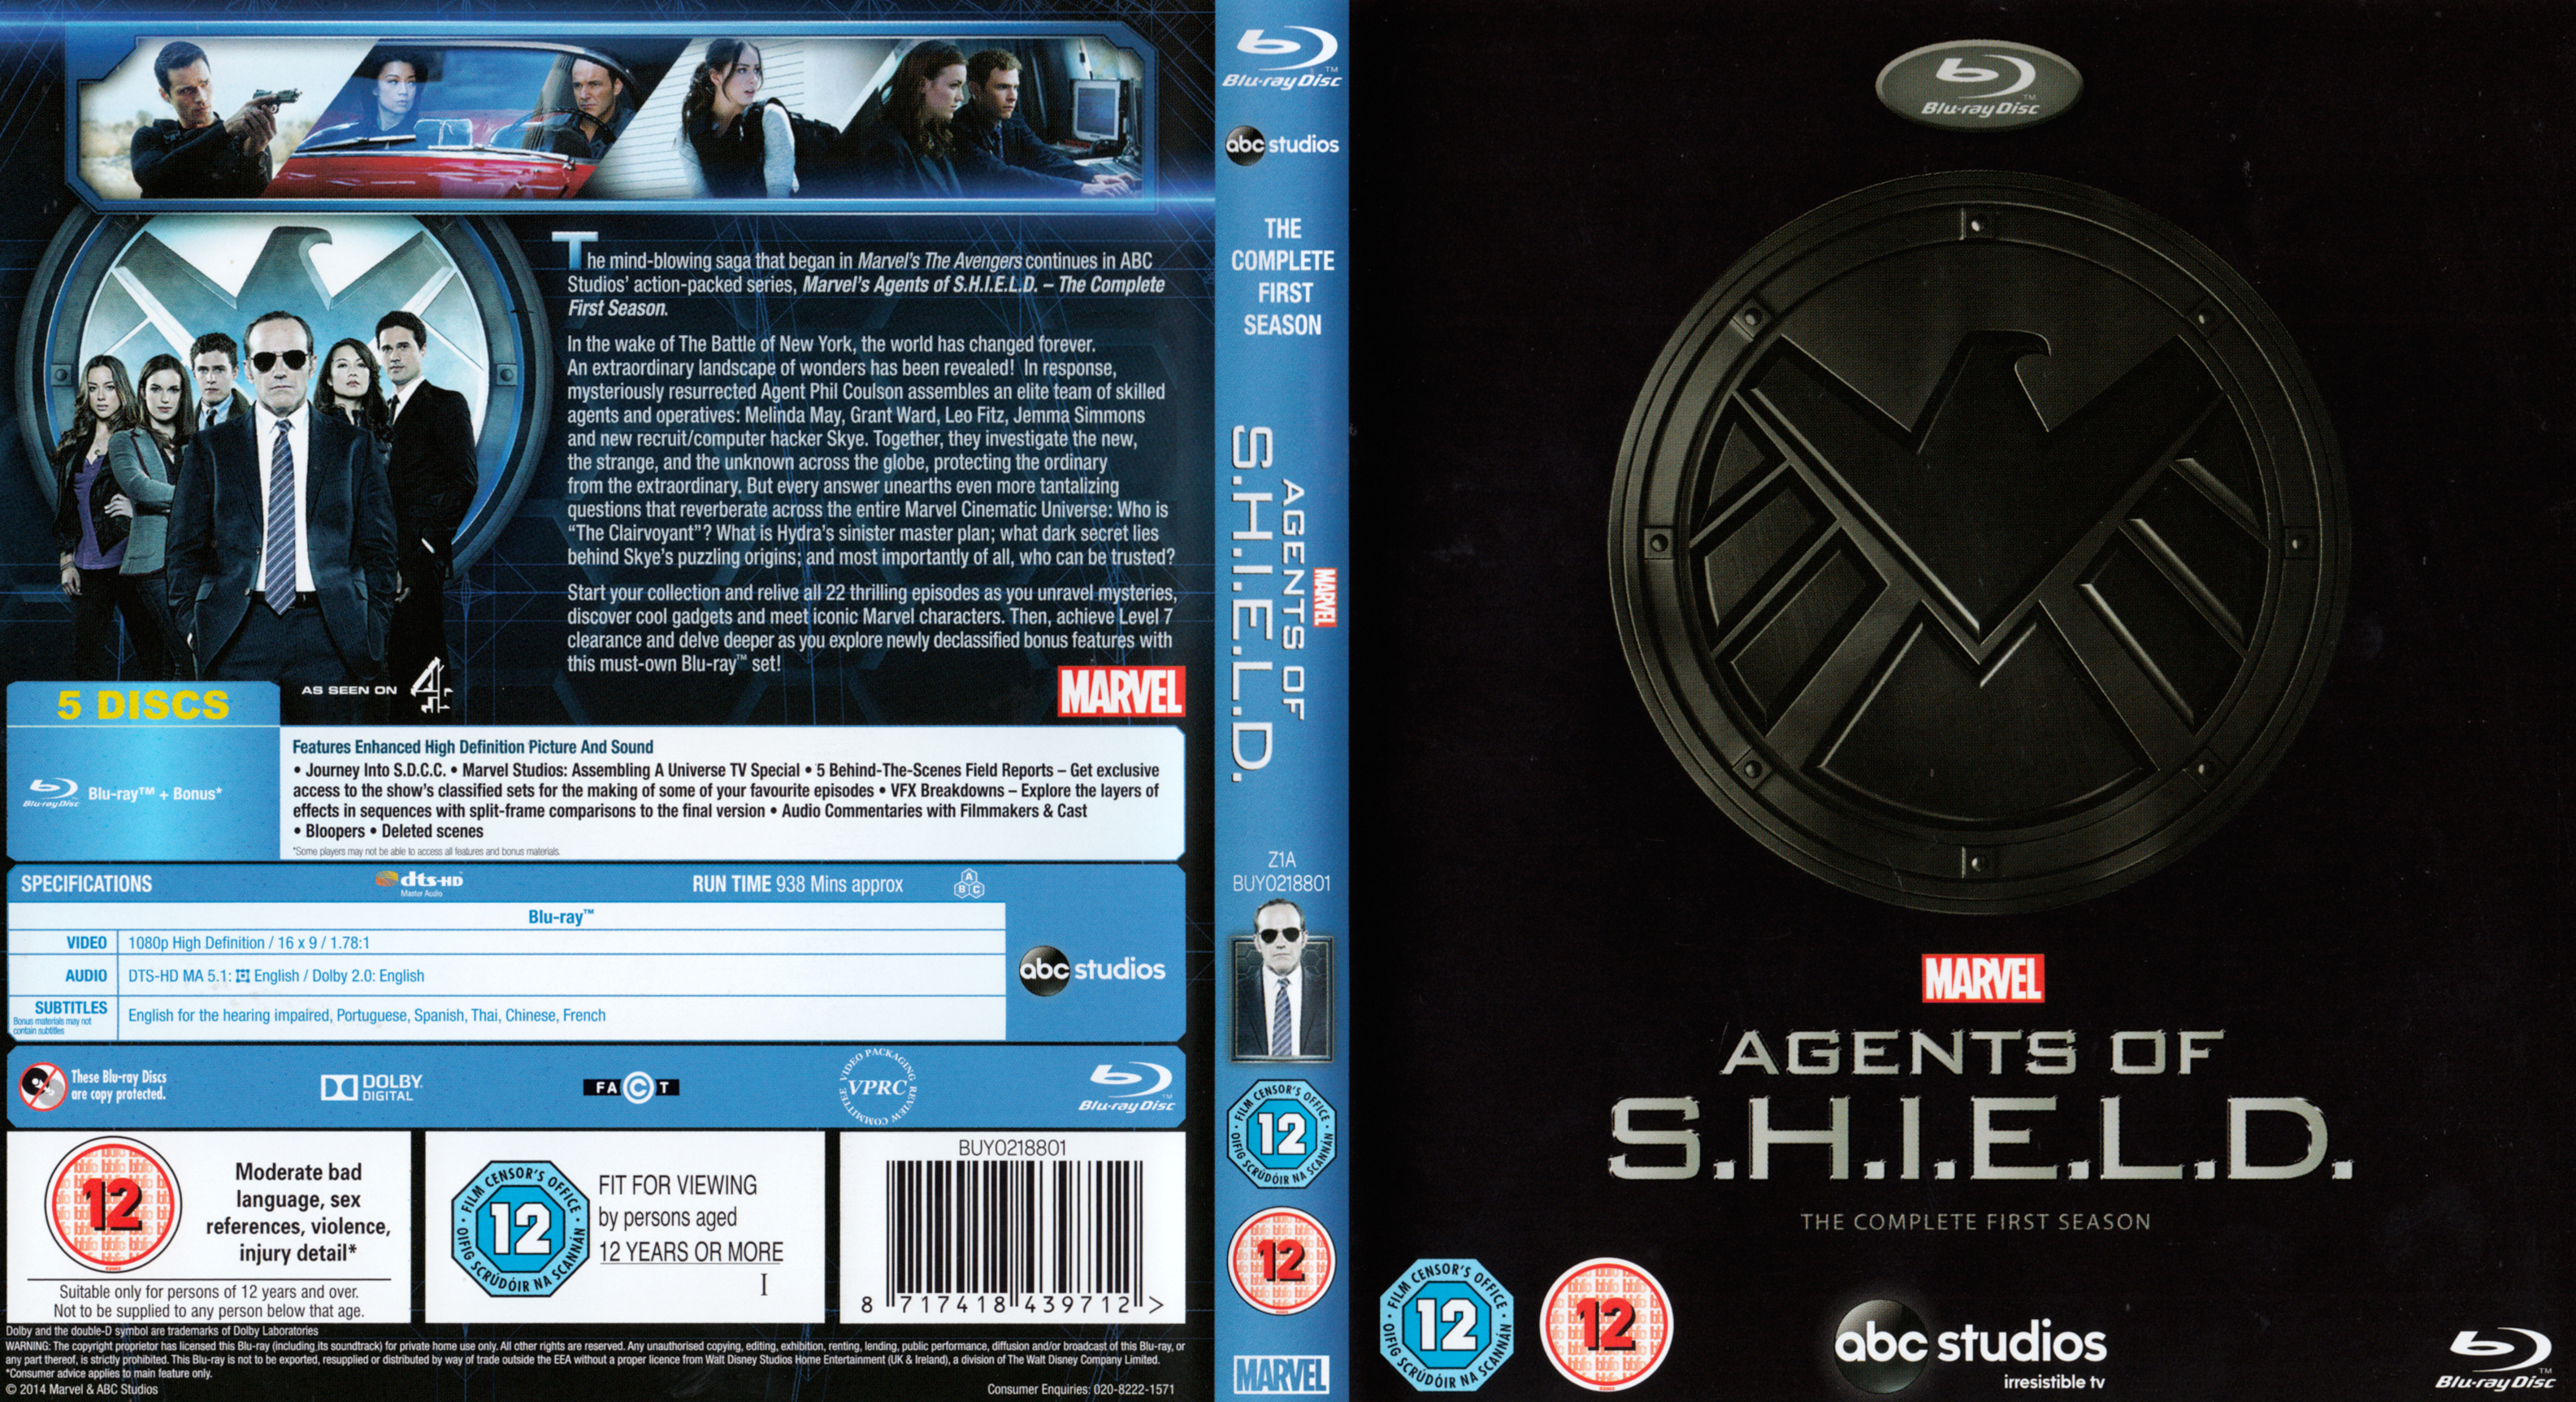 Jaquette DVD Agents of SHIELD Saison 1 Zone 1 (BLU-RAY)